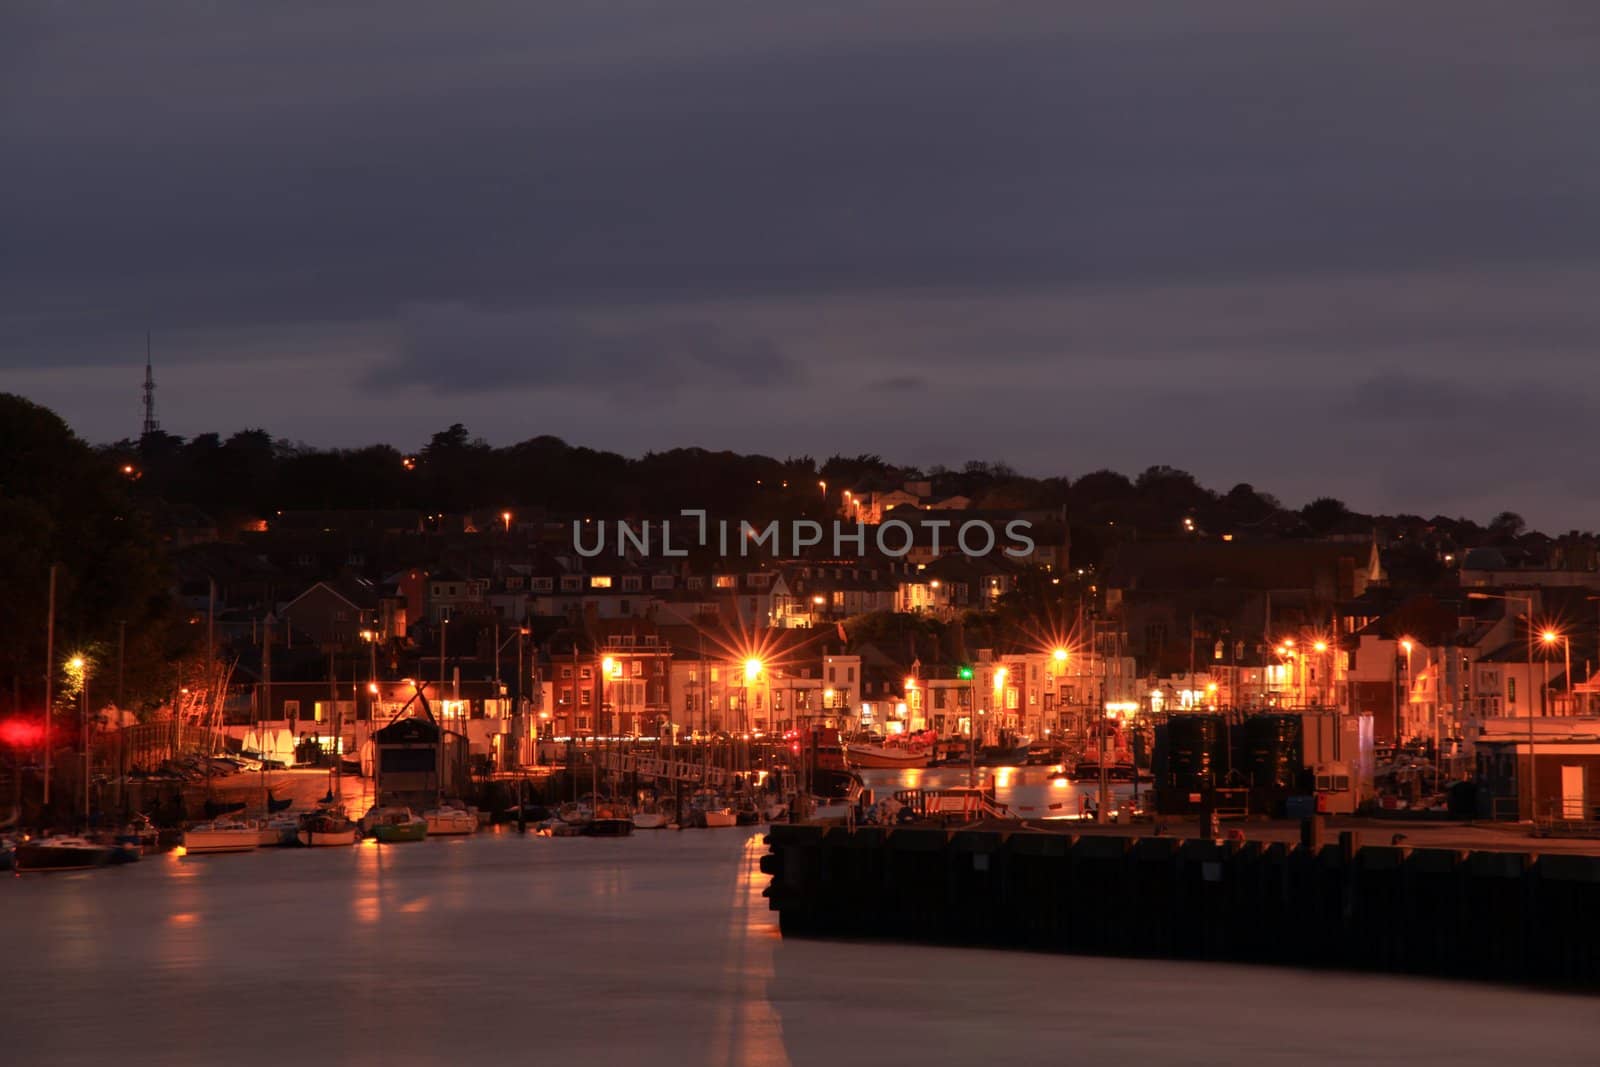 Harbnour at night in weymouth dorset southern Britian